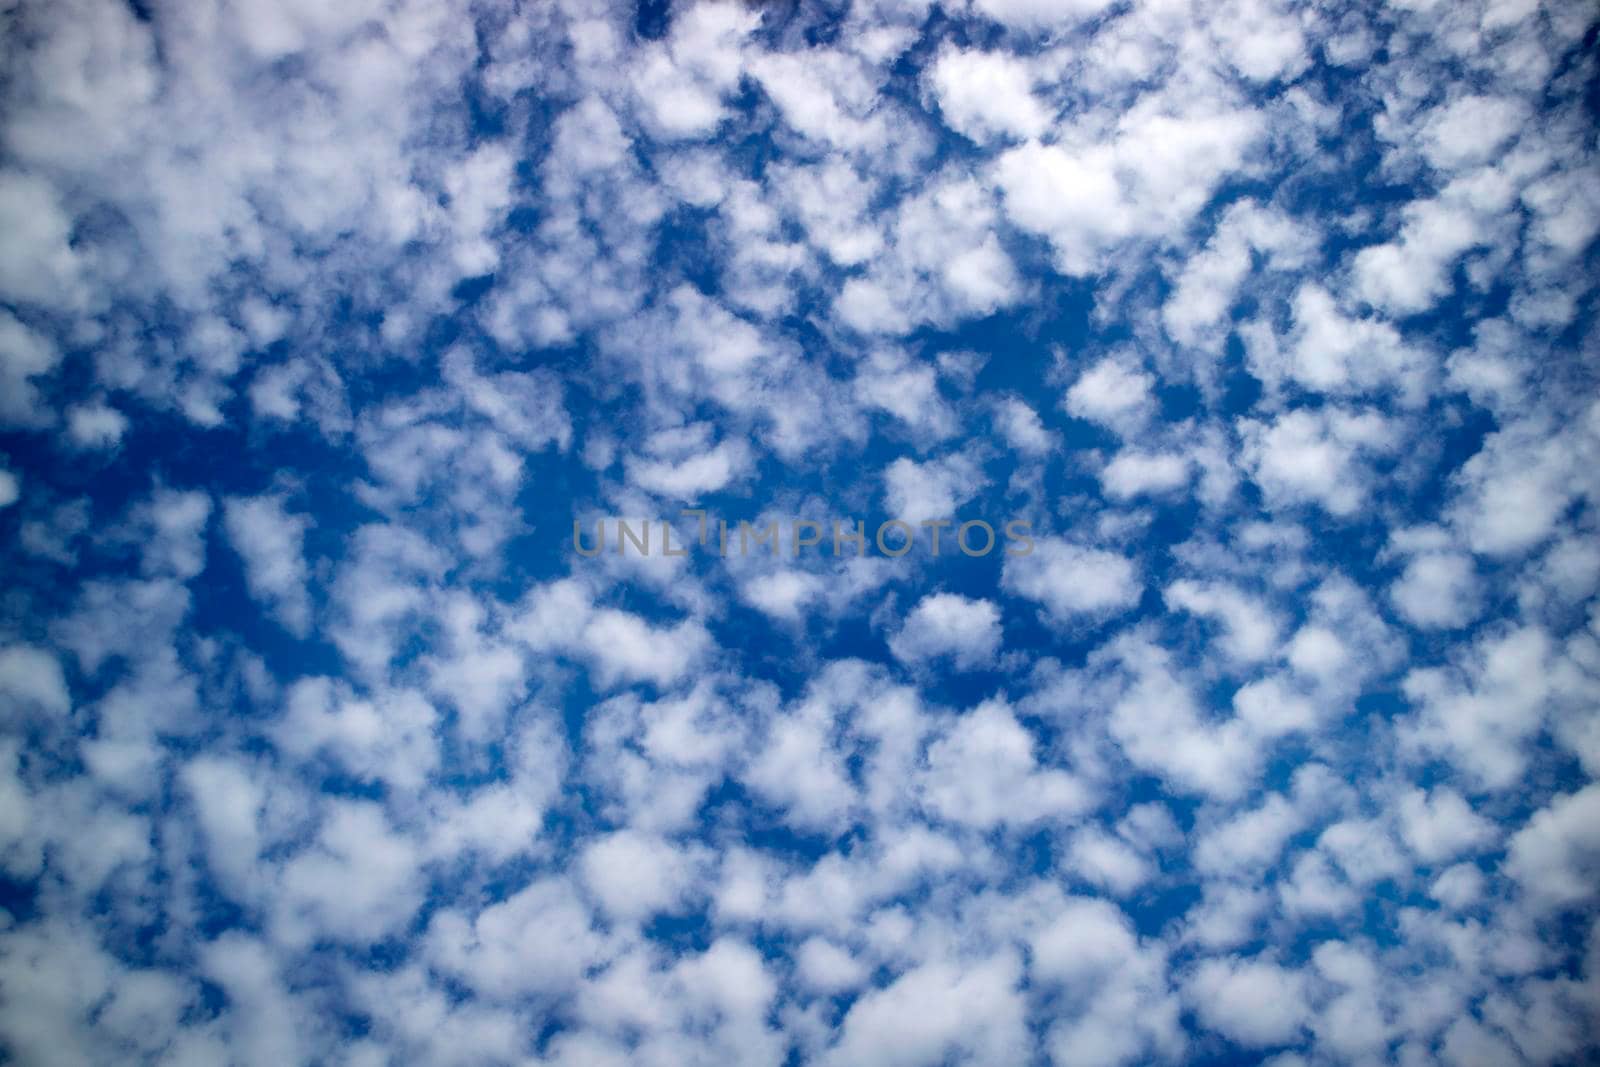 The geometric composition of the clouds  by fotografiche.eu